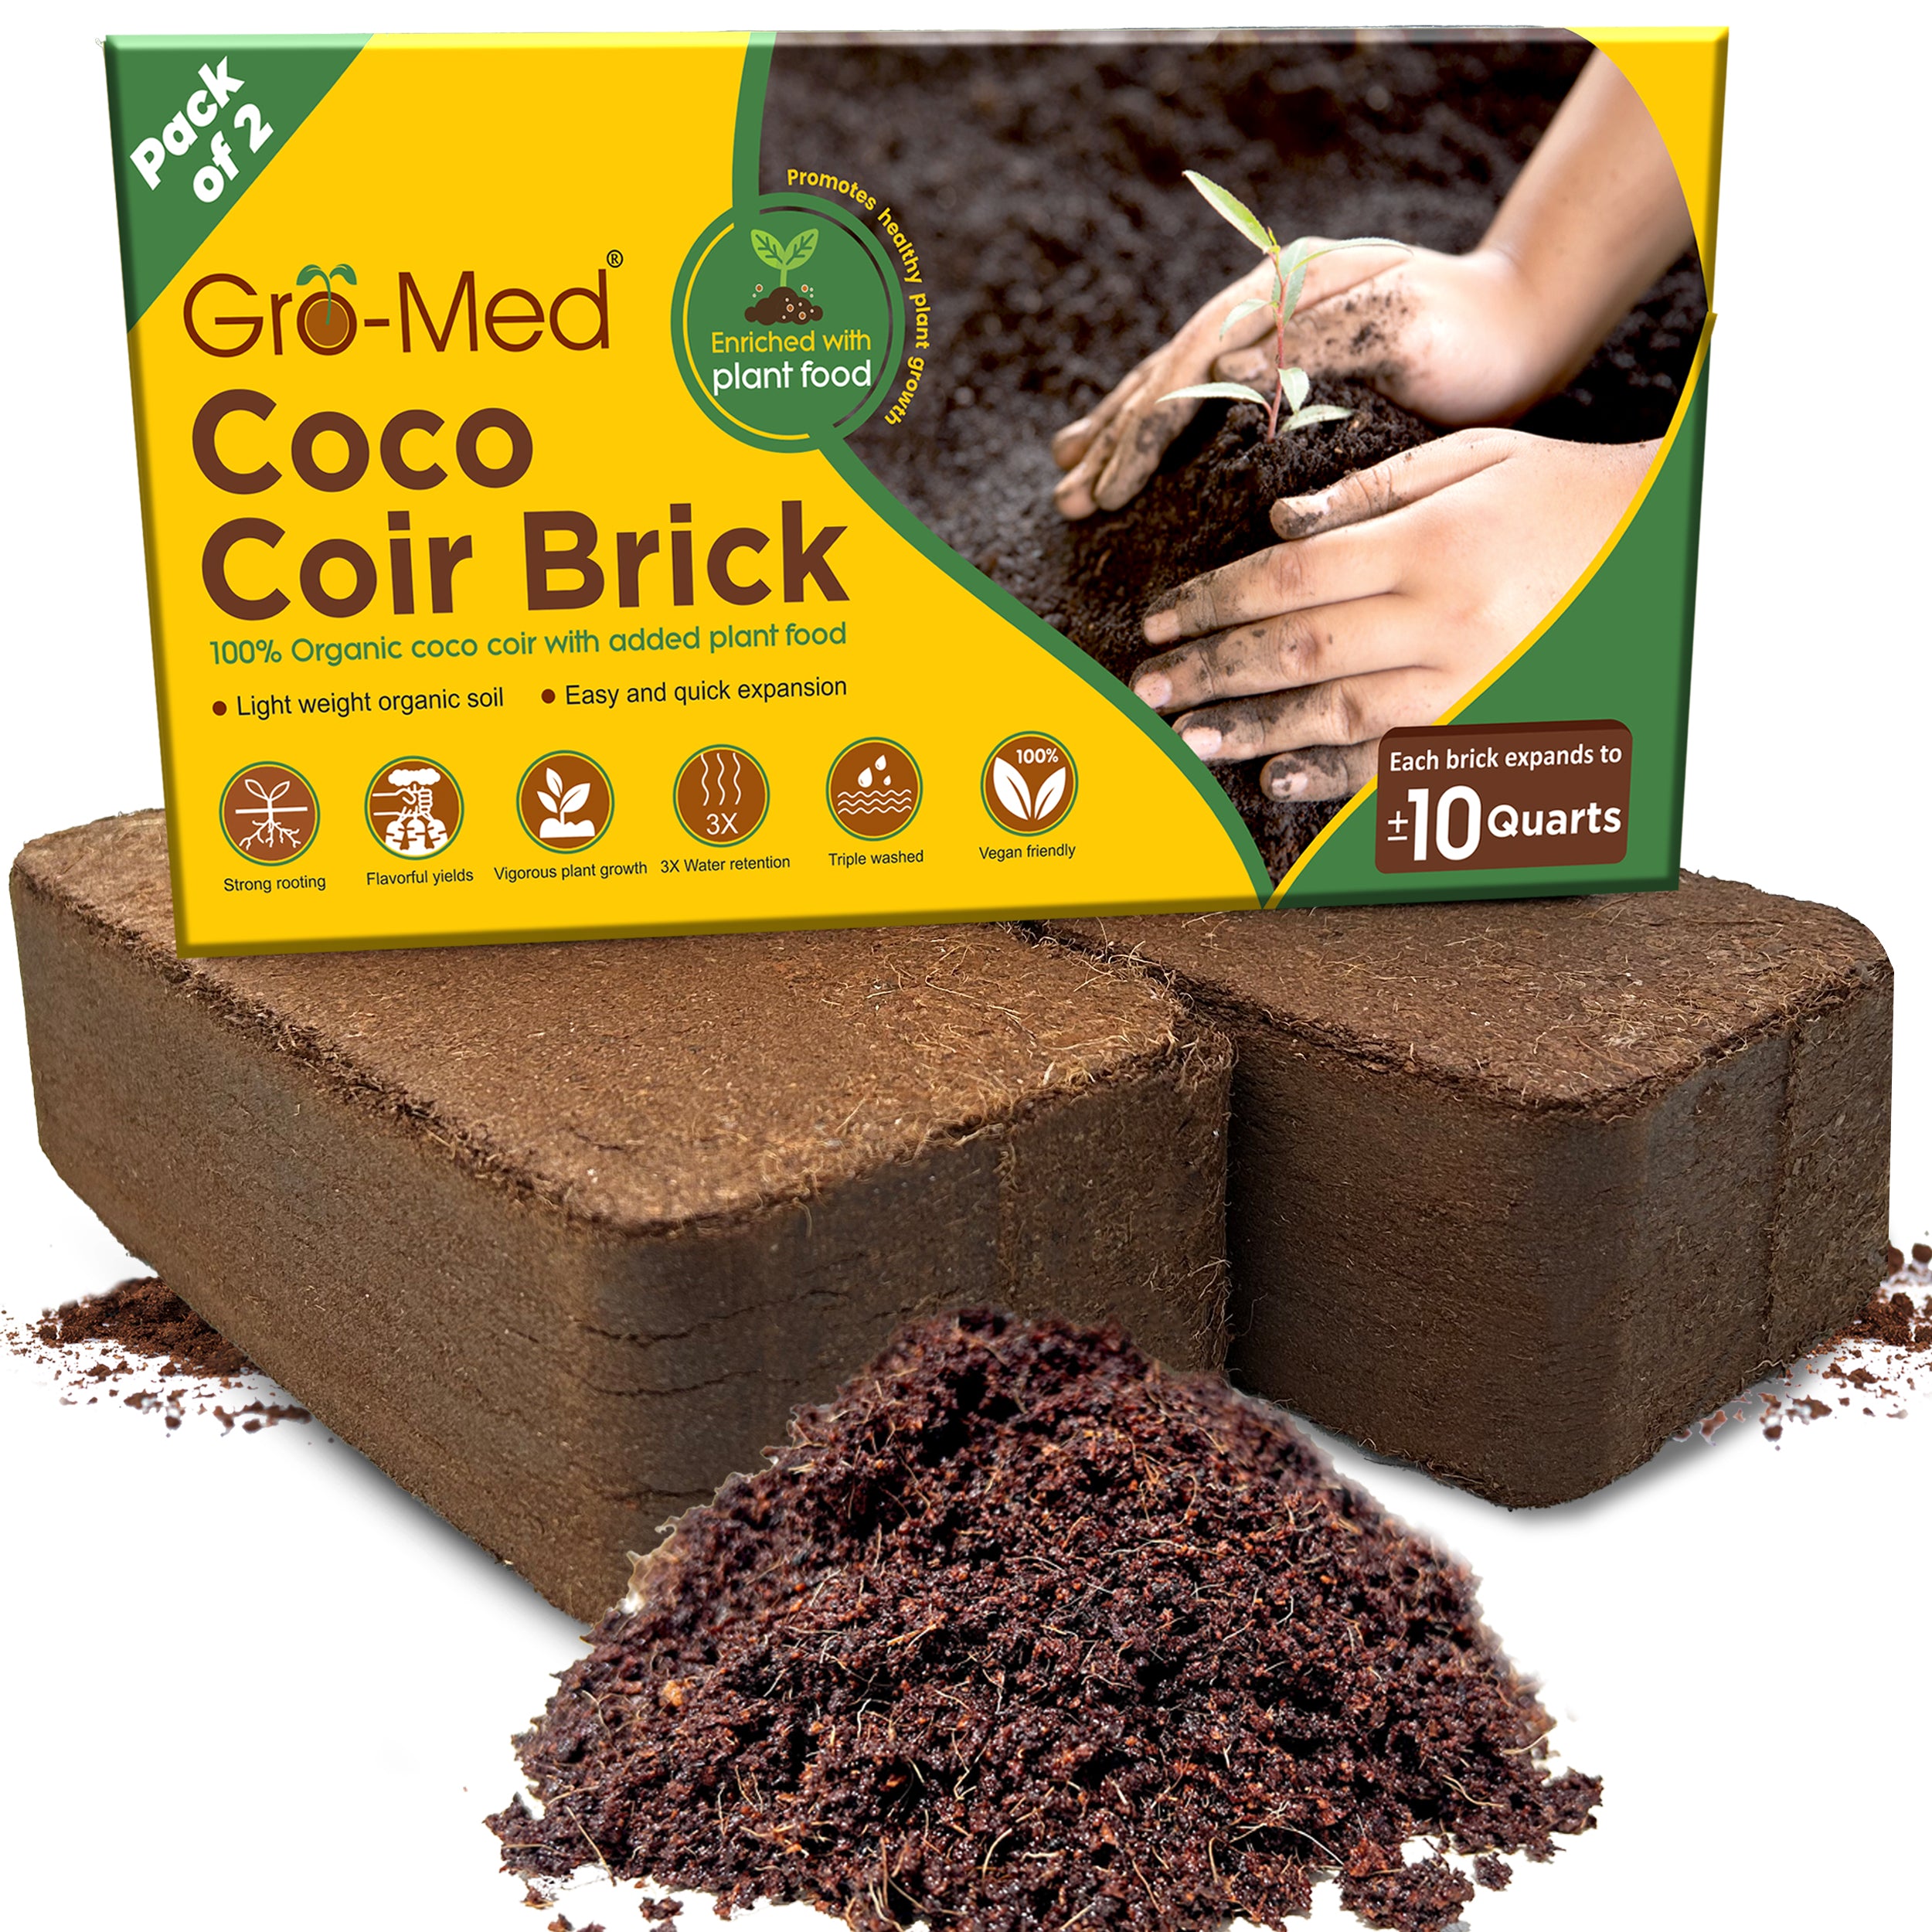 Coco Coir Brick Enriched with Plant Food Pack of 2 Expands to 20 Quarts